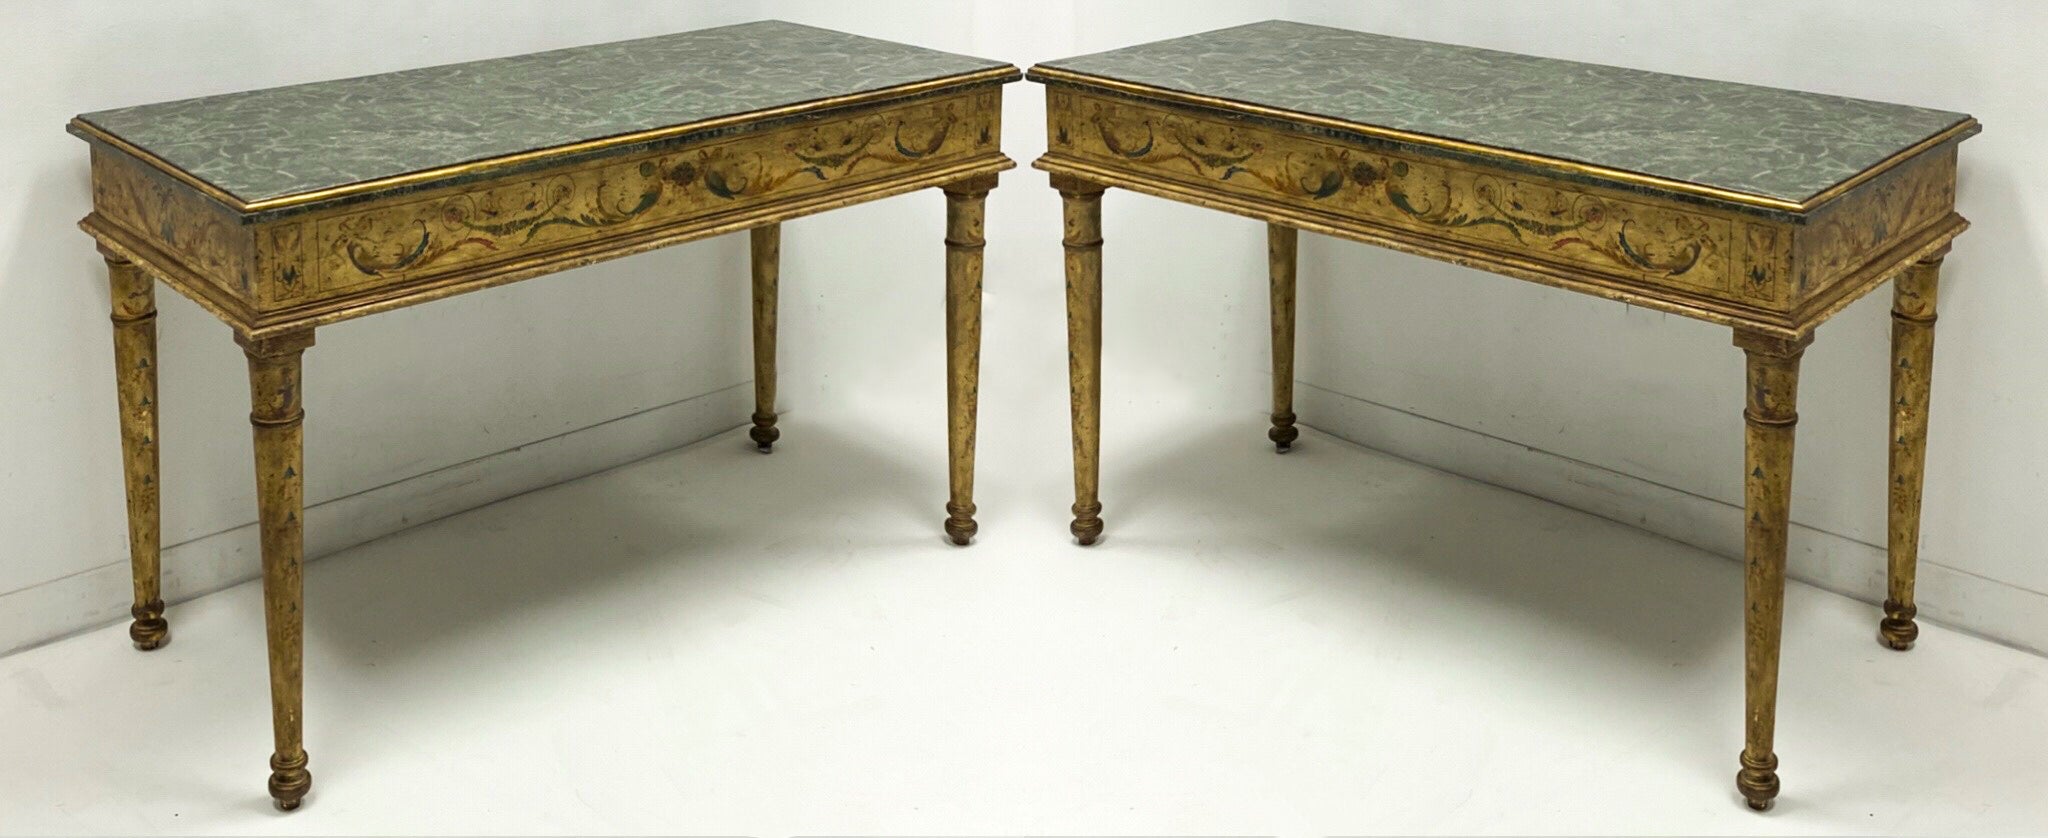 This is a pair of tasselated marble top console tables with French neo-classical styling. They are hand painted and were hand crafted by Maitlandd-Smith. They are in very good condition. Great size with continental styling!